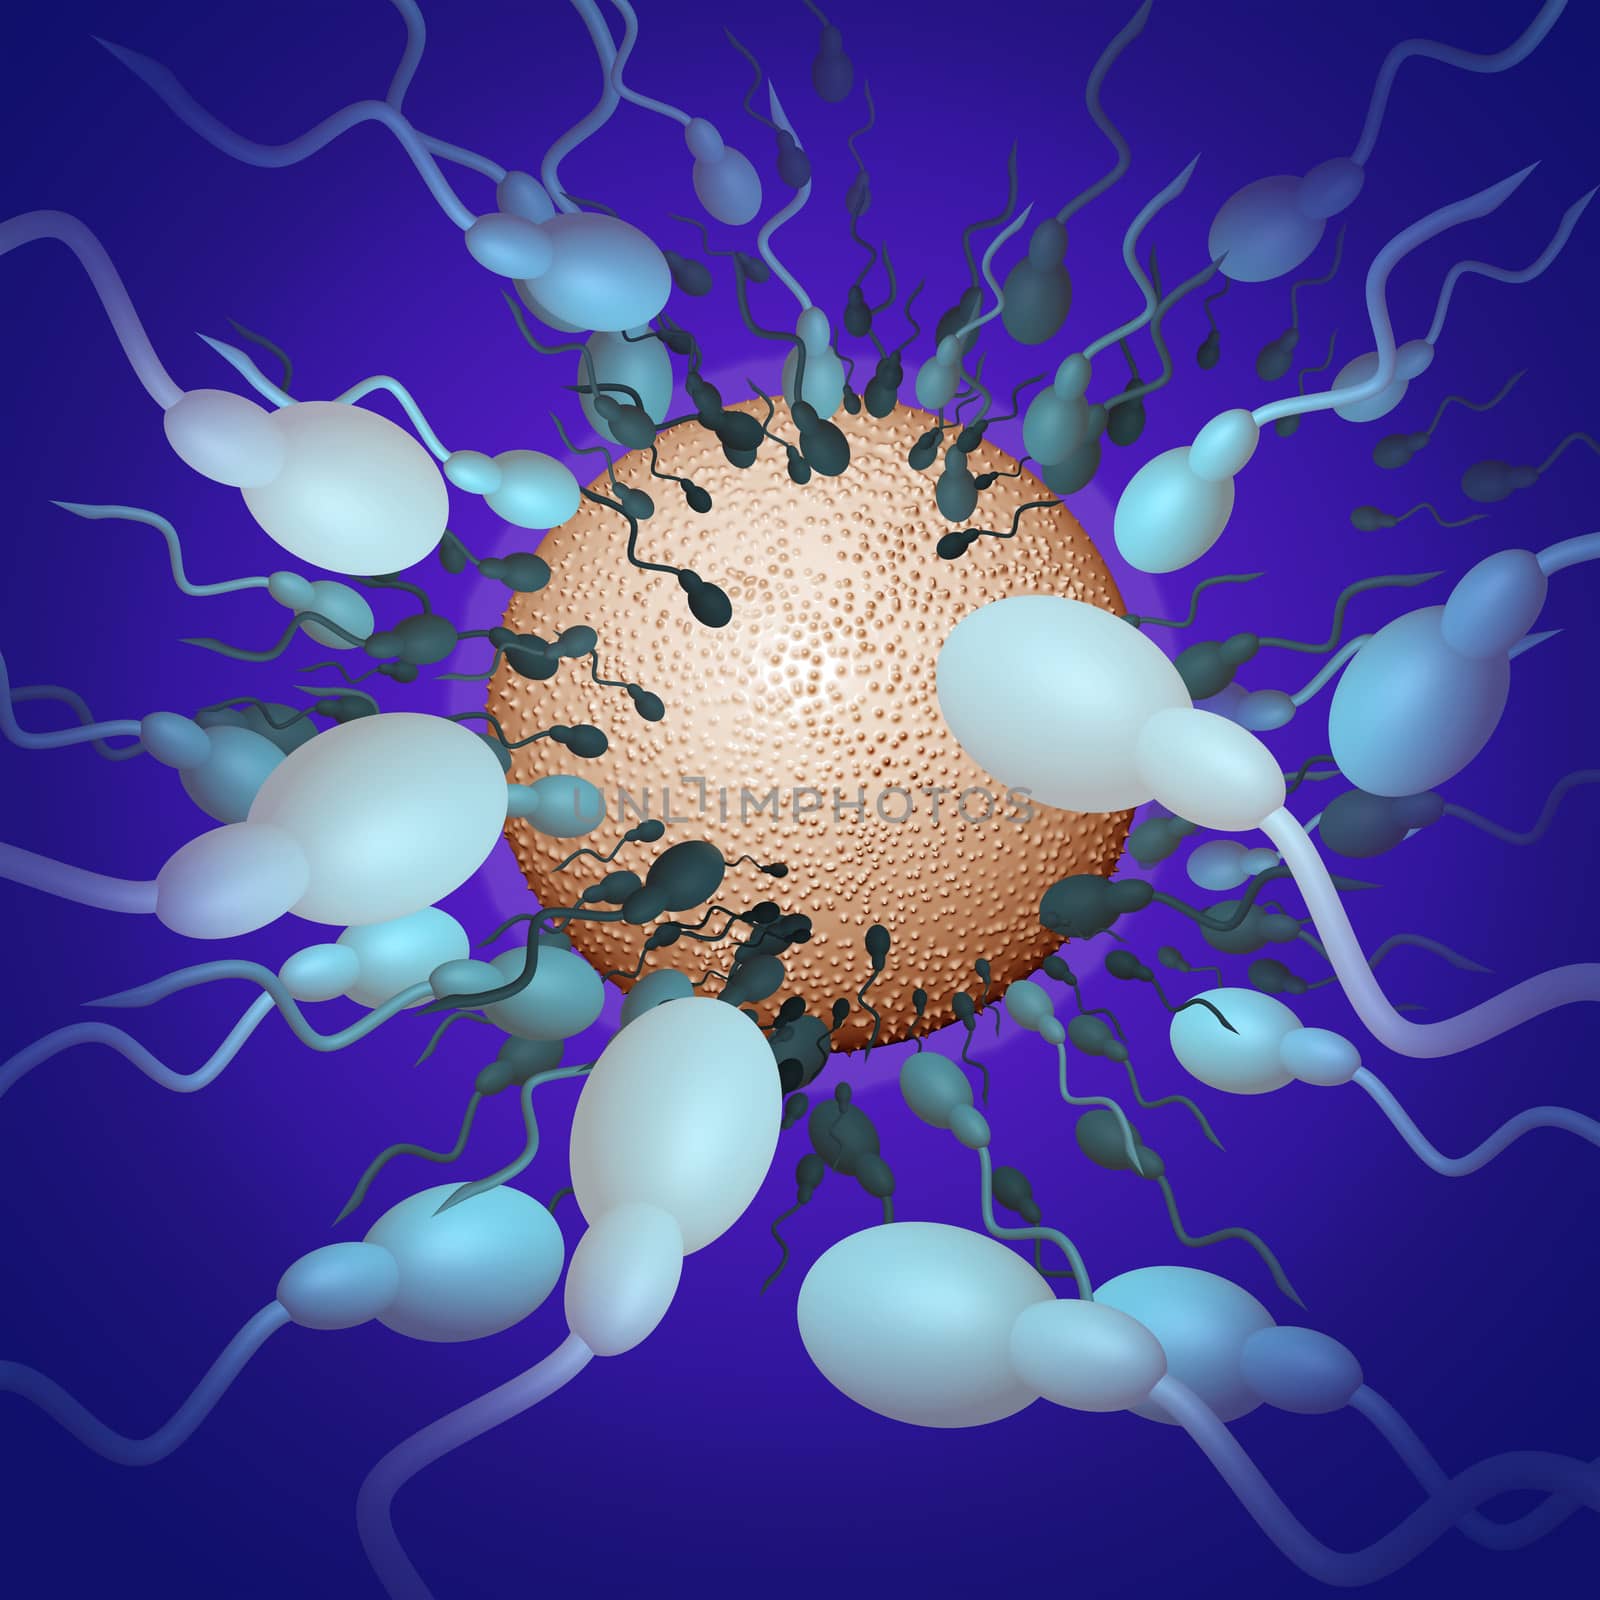 sperms heading towards egg made in 3d software